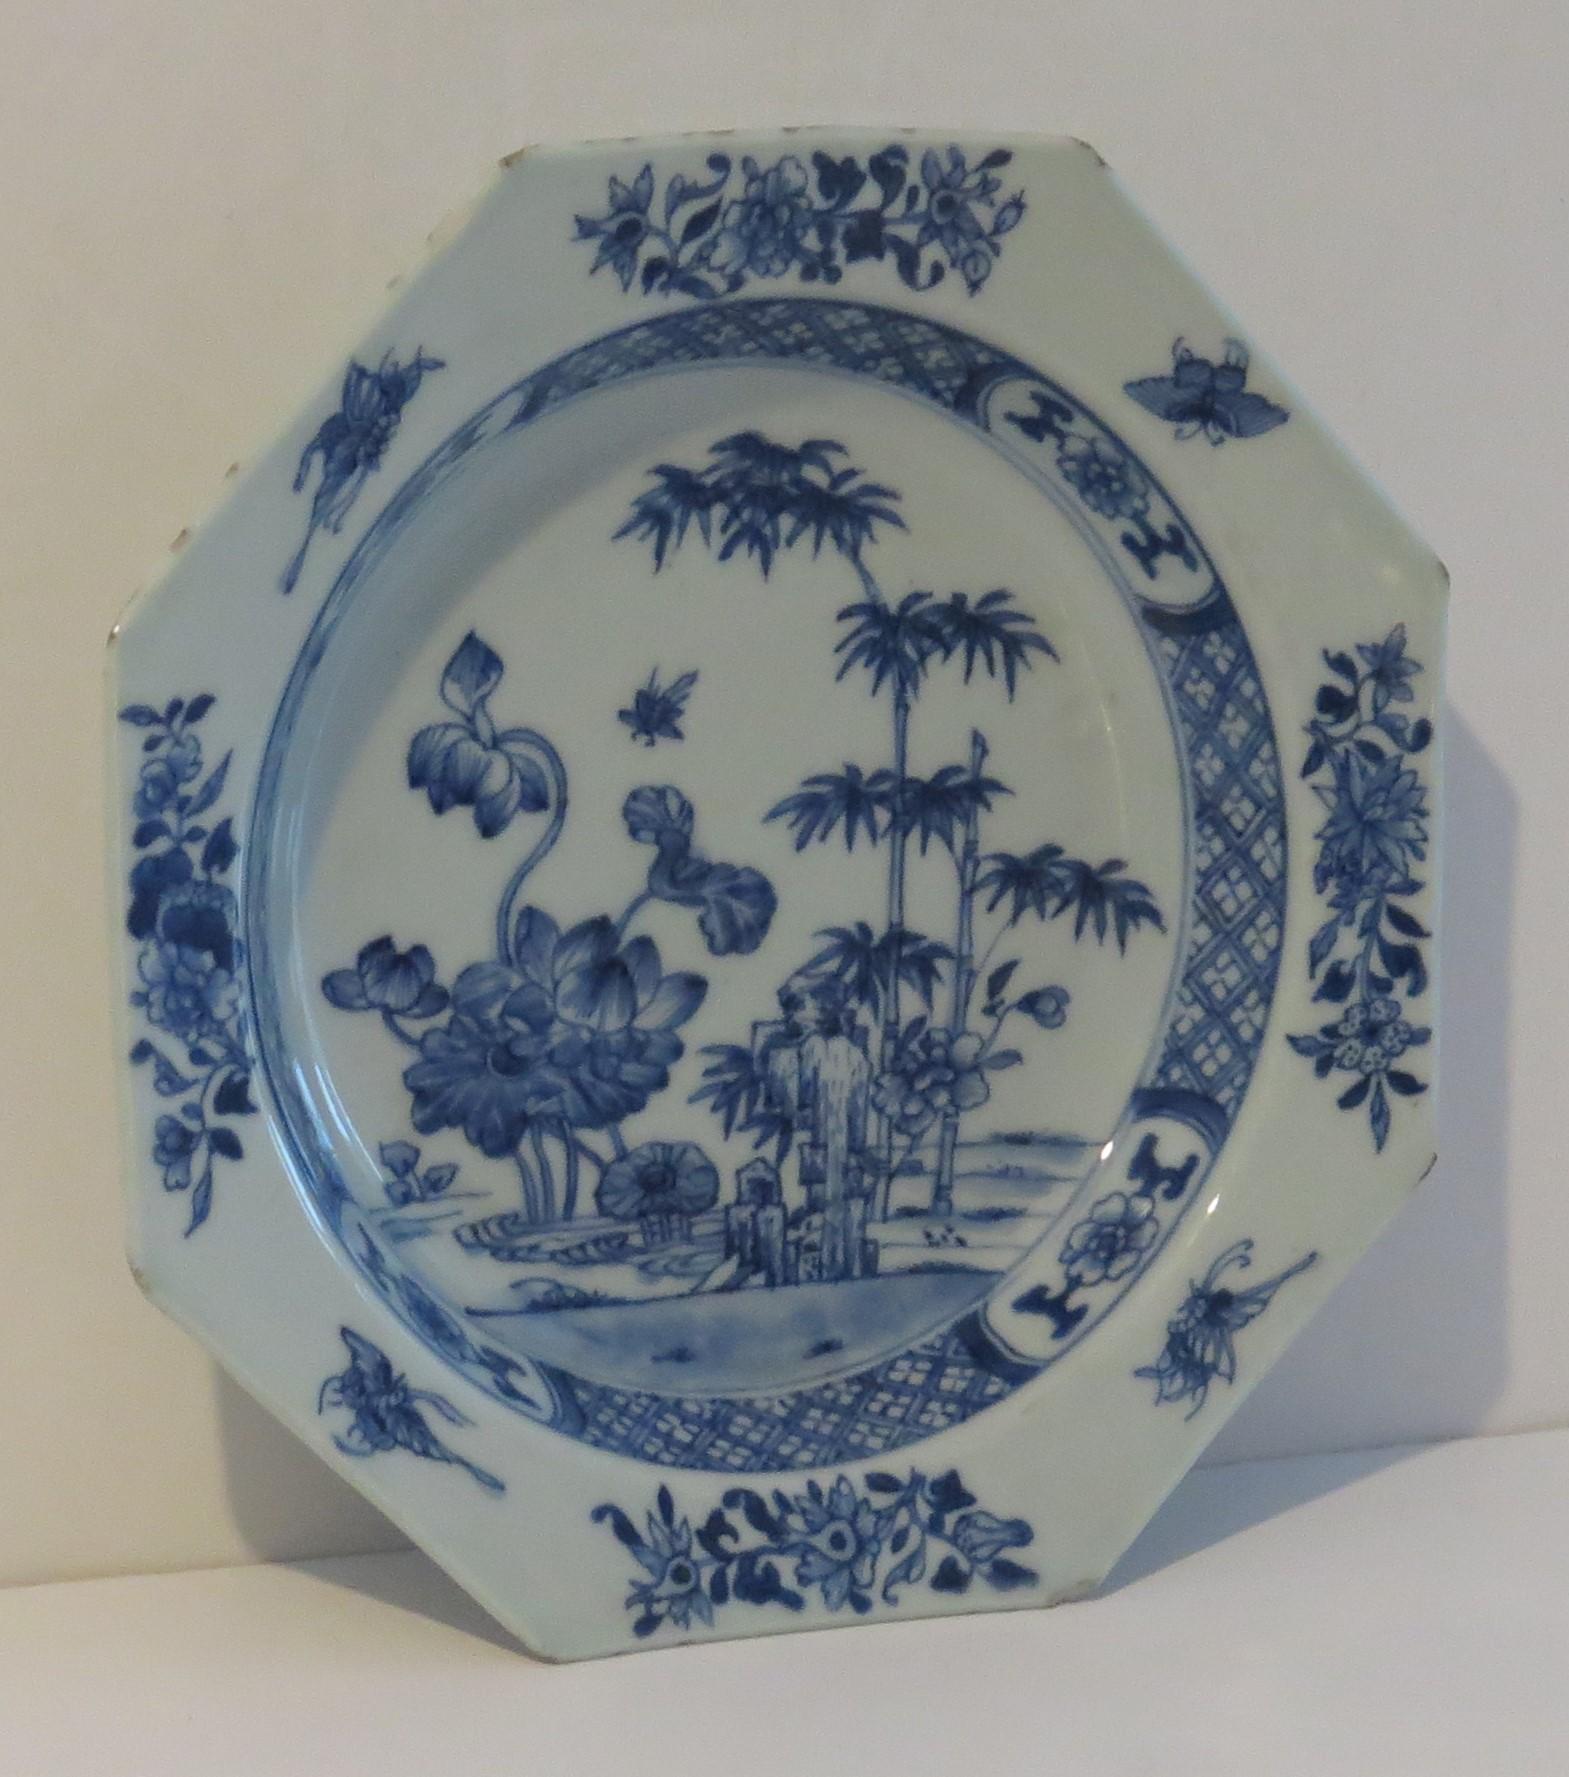 This is a very good Chinese porcelain Soup plate or deep plate made for the export (Canton) market, during the second half of the 18th century, Circa 1770.

The plate is octagonal in shape and well hand decorated in varying shades of cobalt blue,